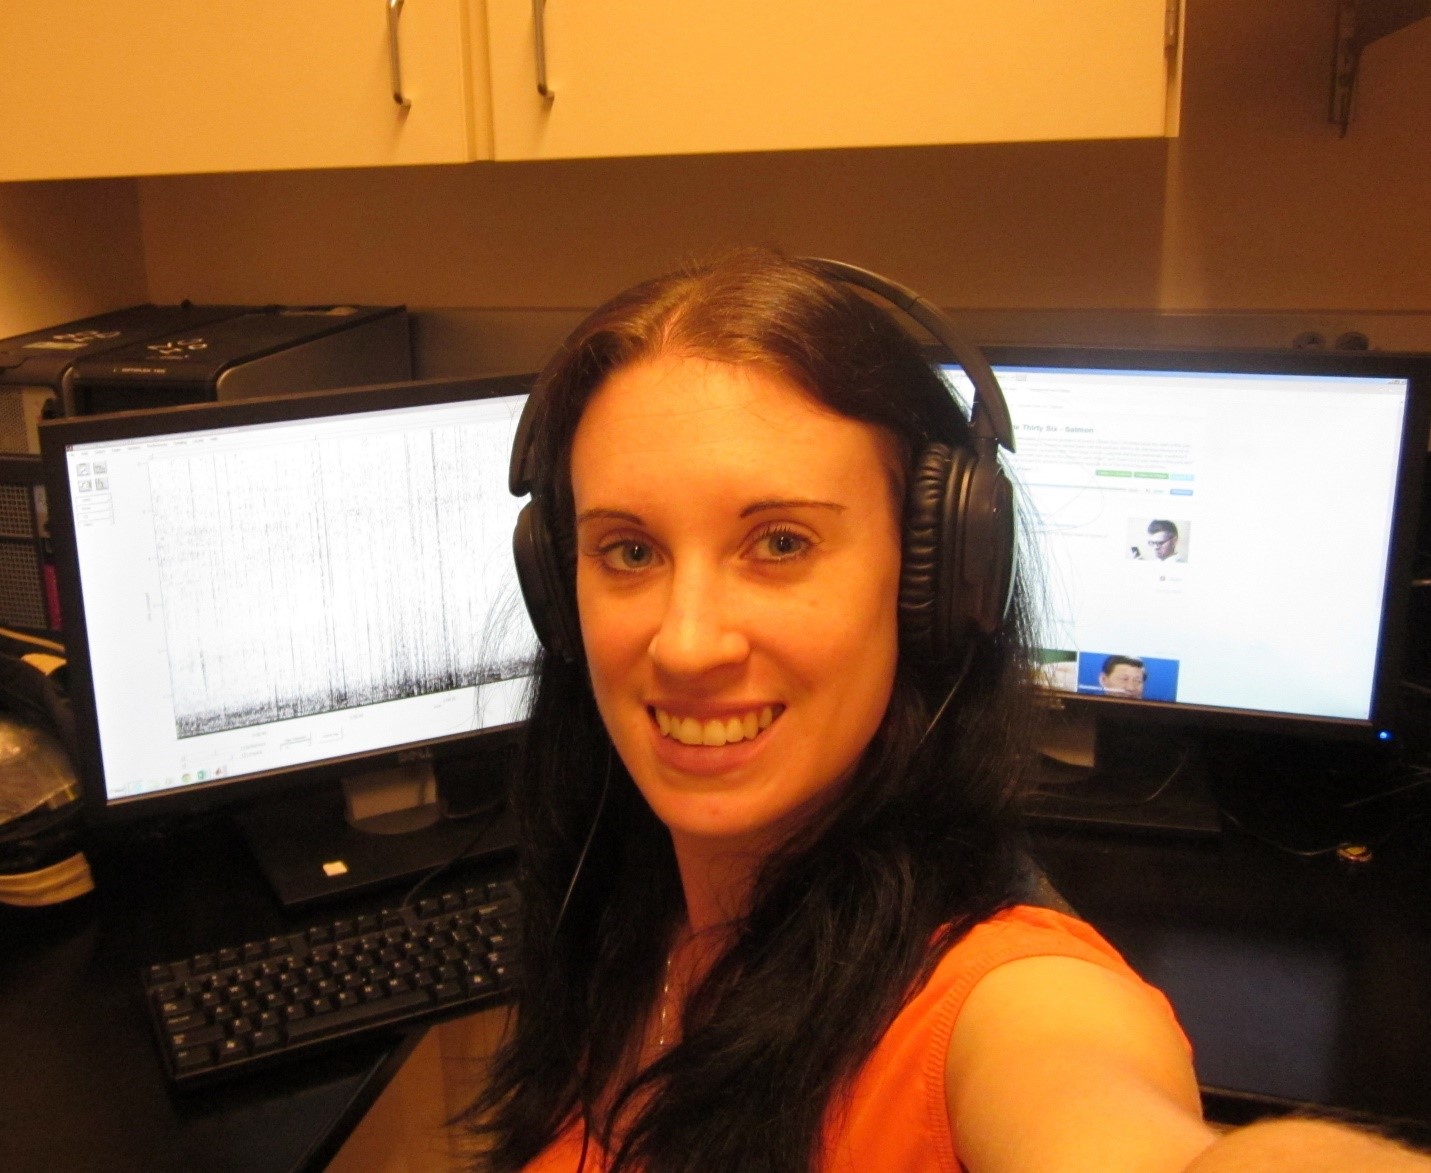 A girl wearing headphones and sitting in front of two monitors with a satisfied smile on her face.